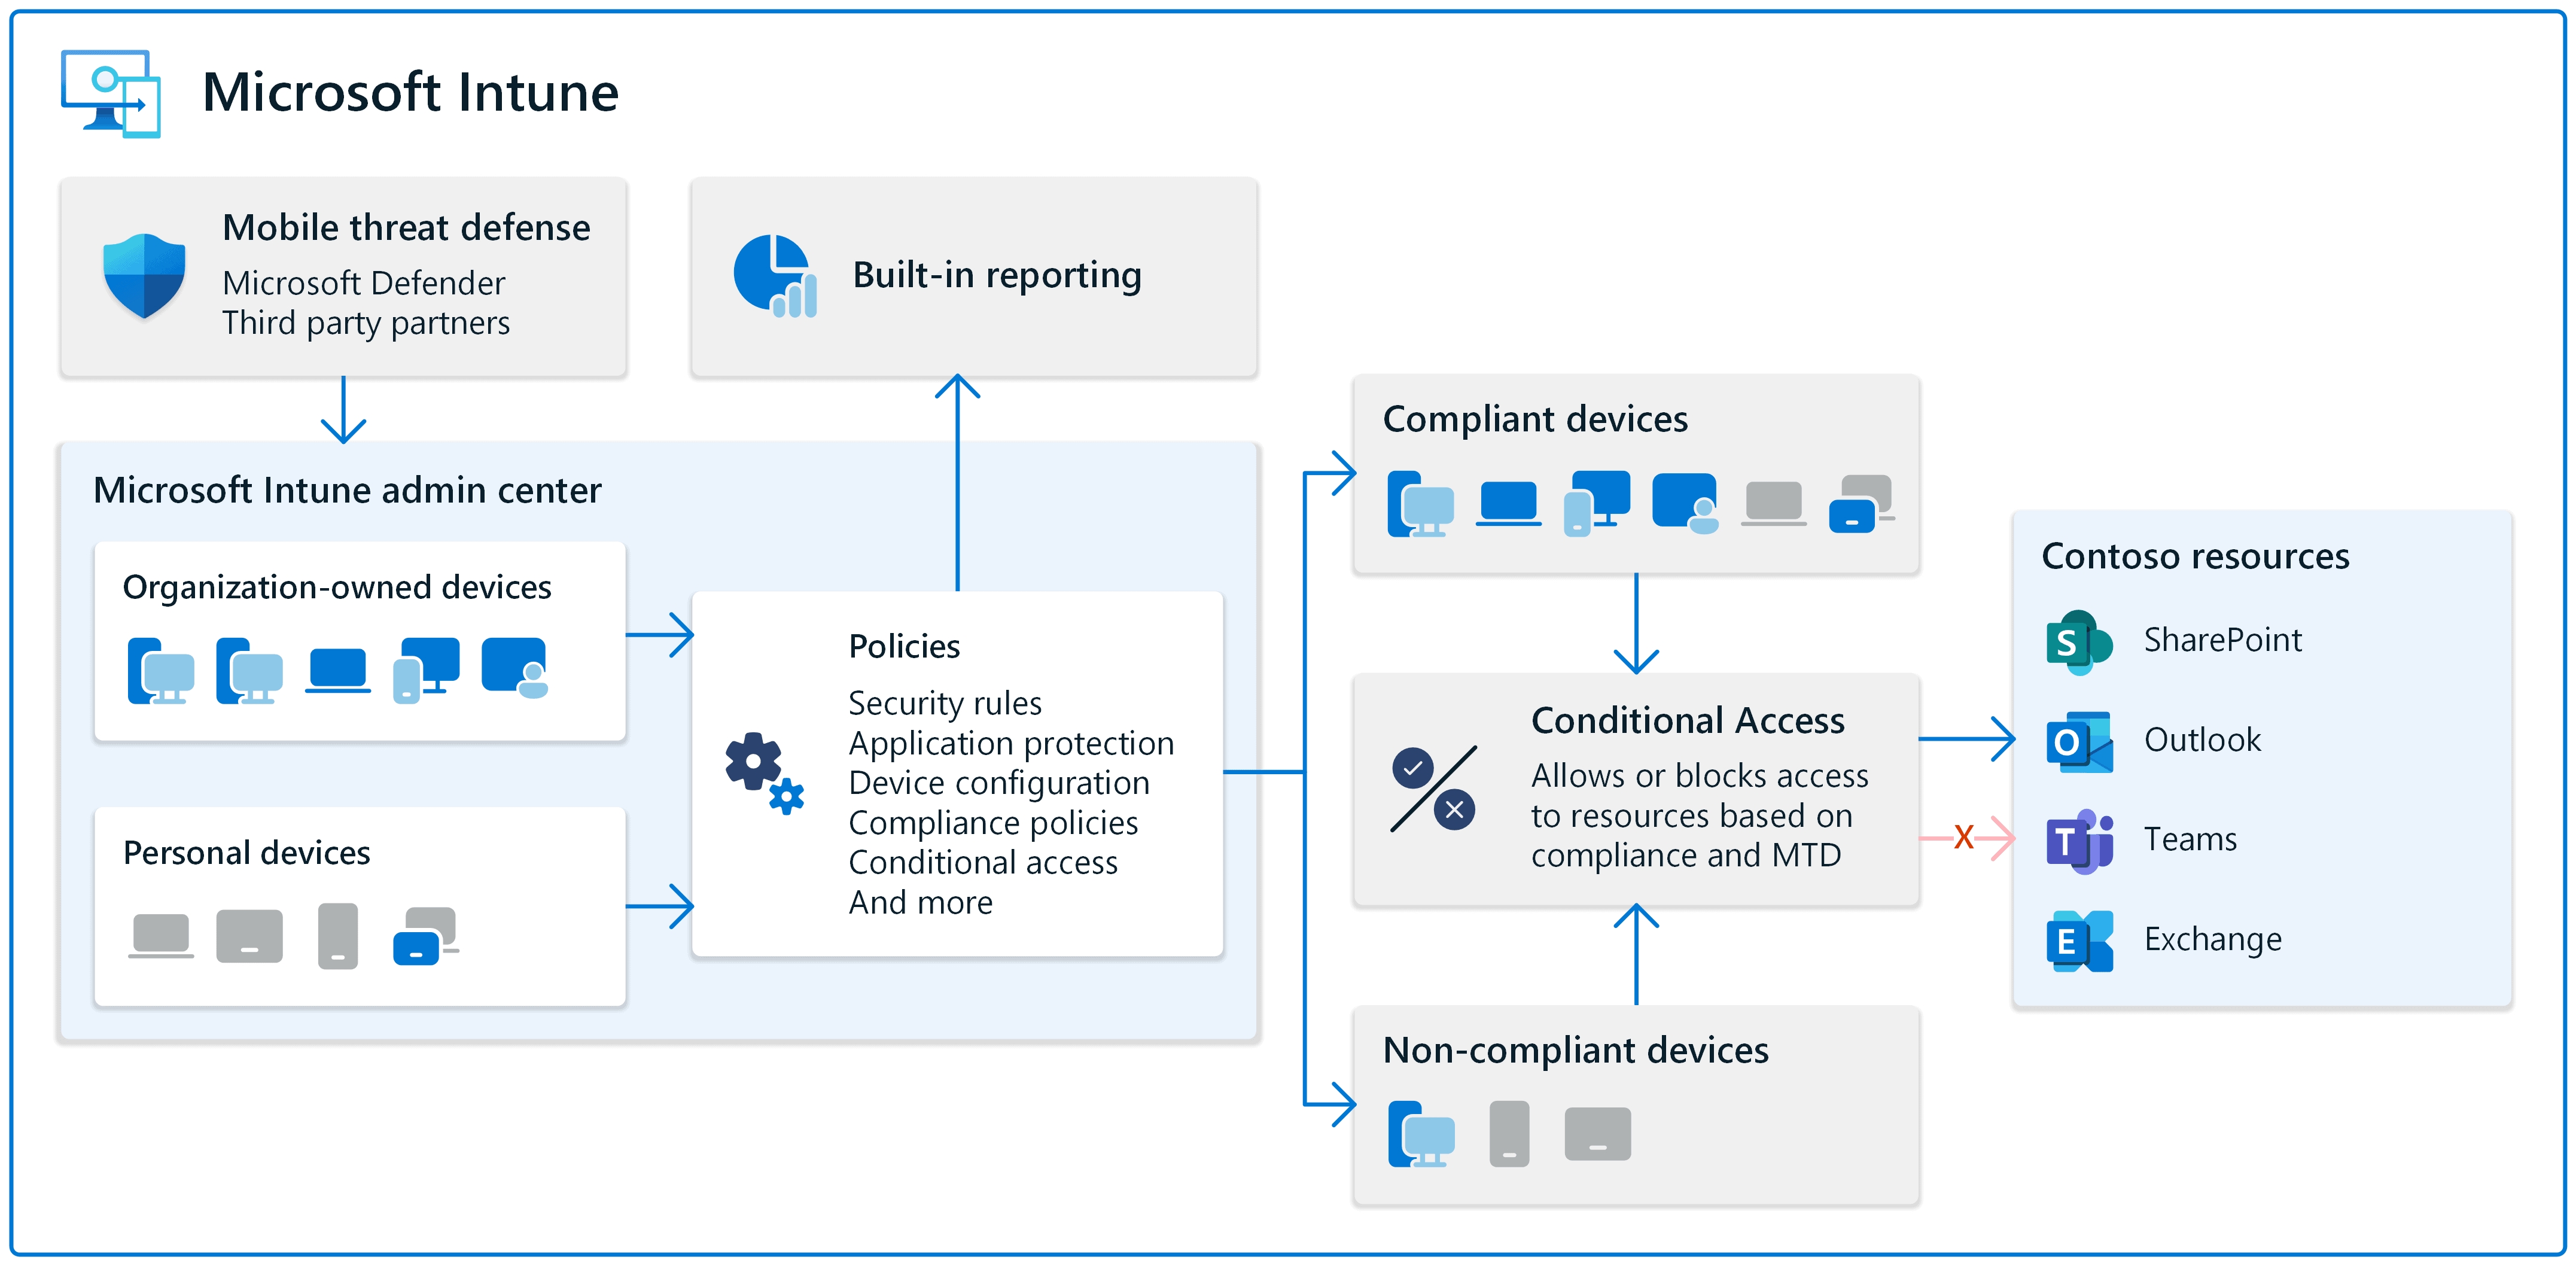 Supporting how to use Microsoft Intune